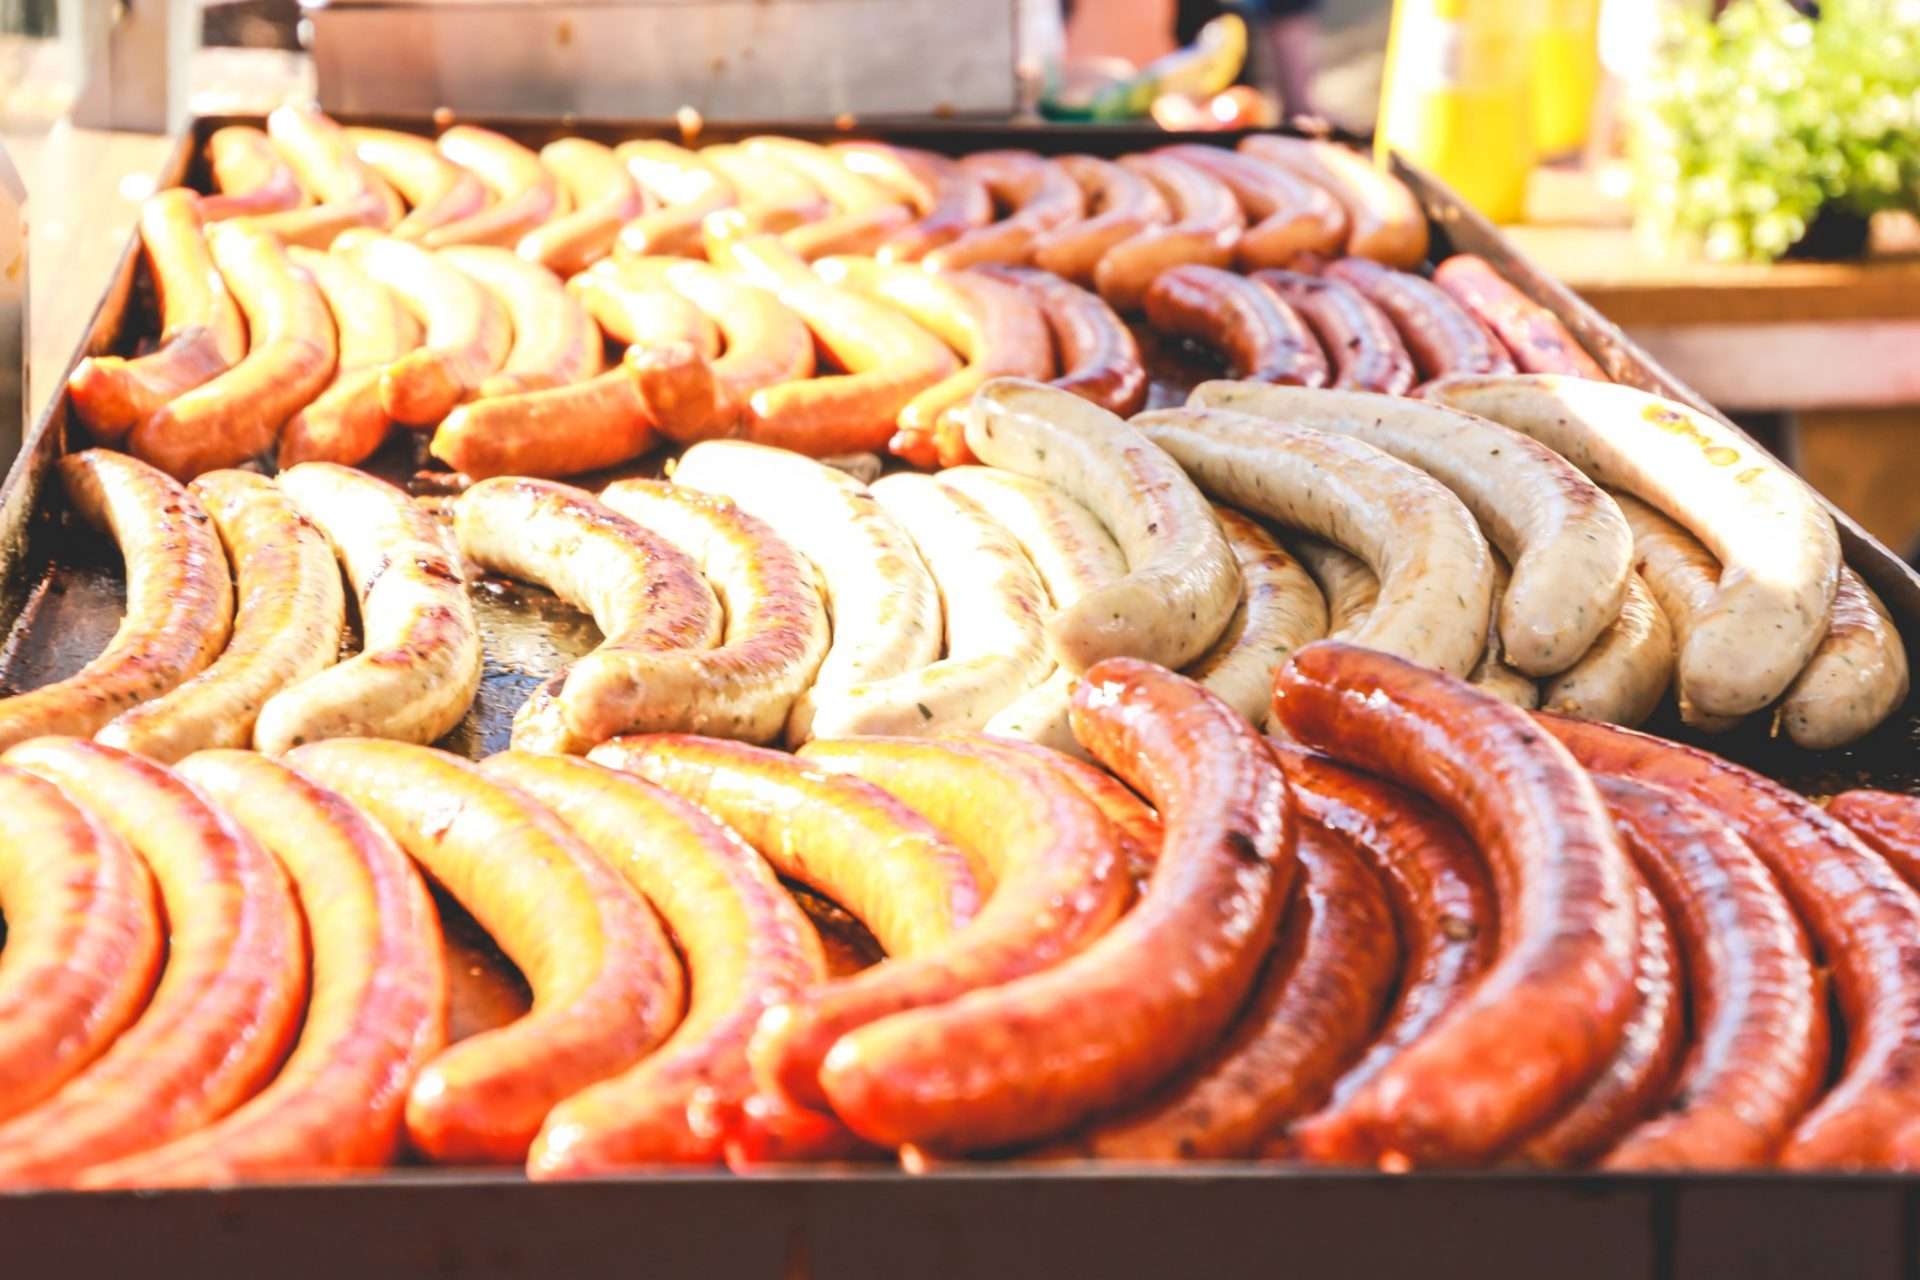 Bratwursts piled up on grill